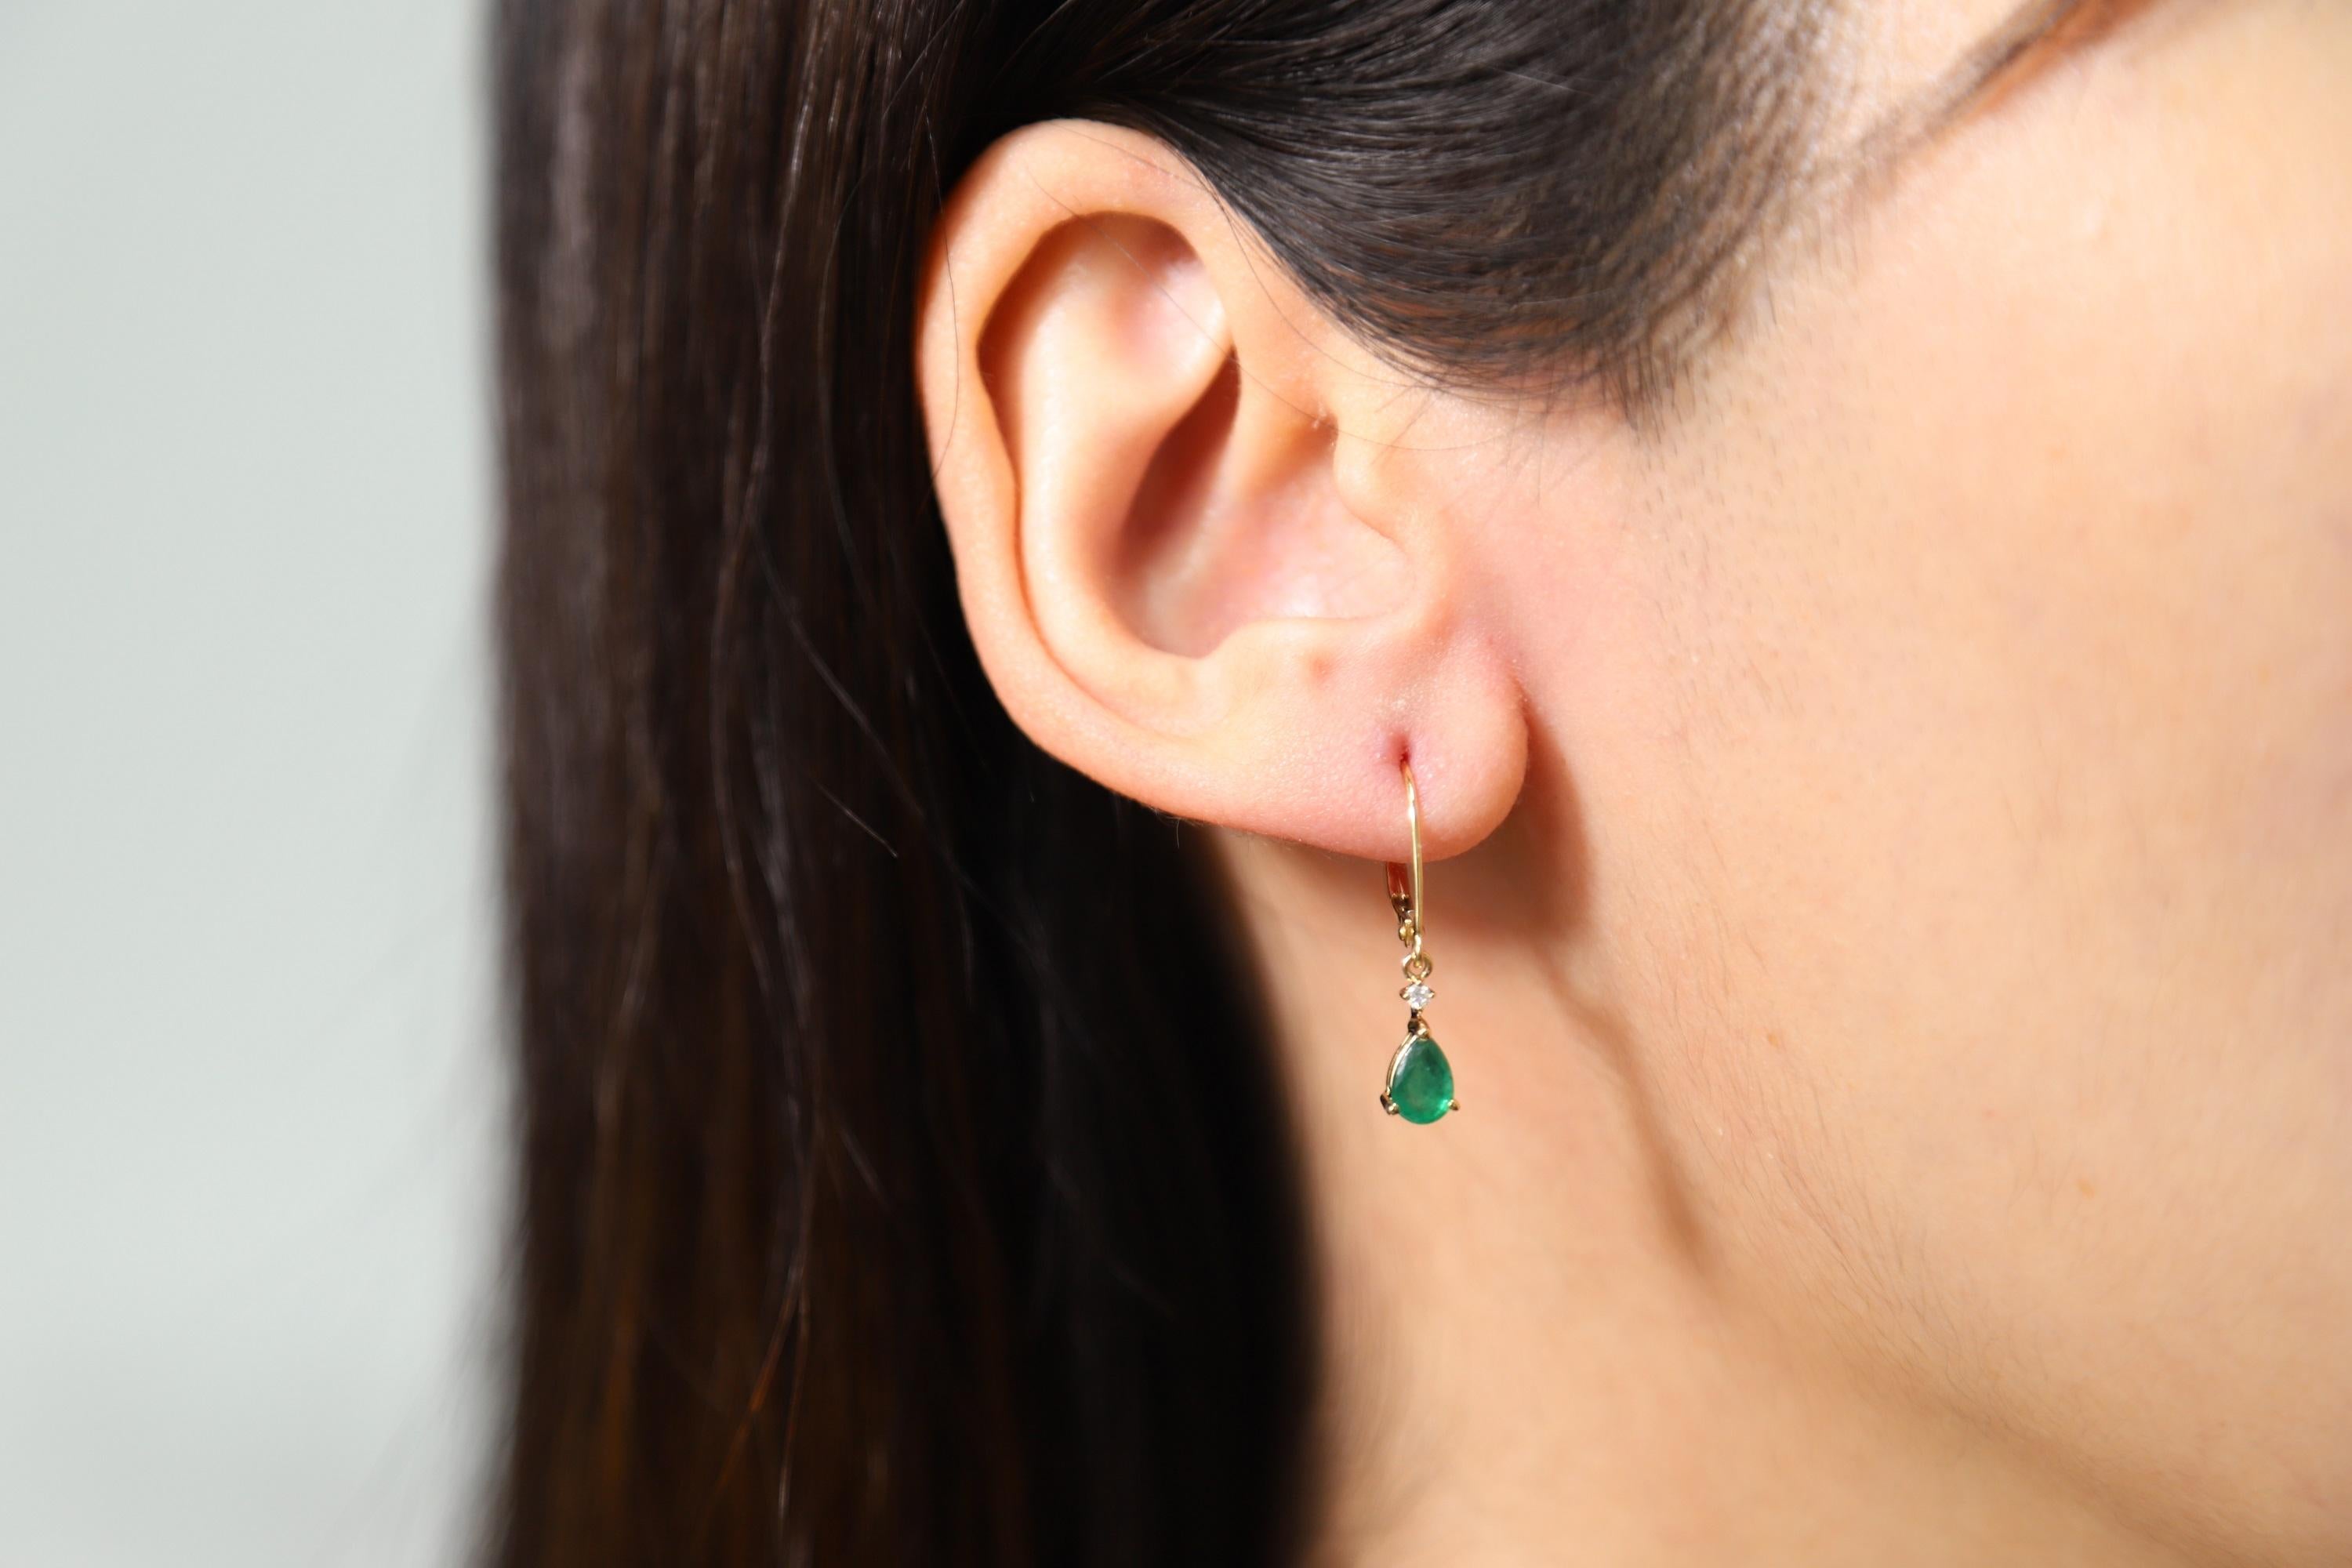 Decorate yourself in elegance with this Earring is crafted from 14K Yellow Gold by Gin & Grace Earring. This Earring is made up of 4X6 Pear-Cut prong setting Emerald (2 pcs) 0.72 Carat and Round-Cut prong setting Diamond (2 pcs) 0.03 Carat. This